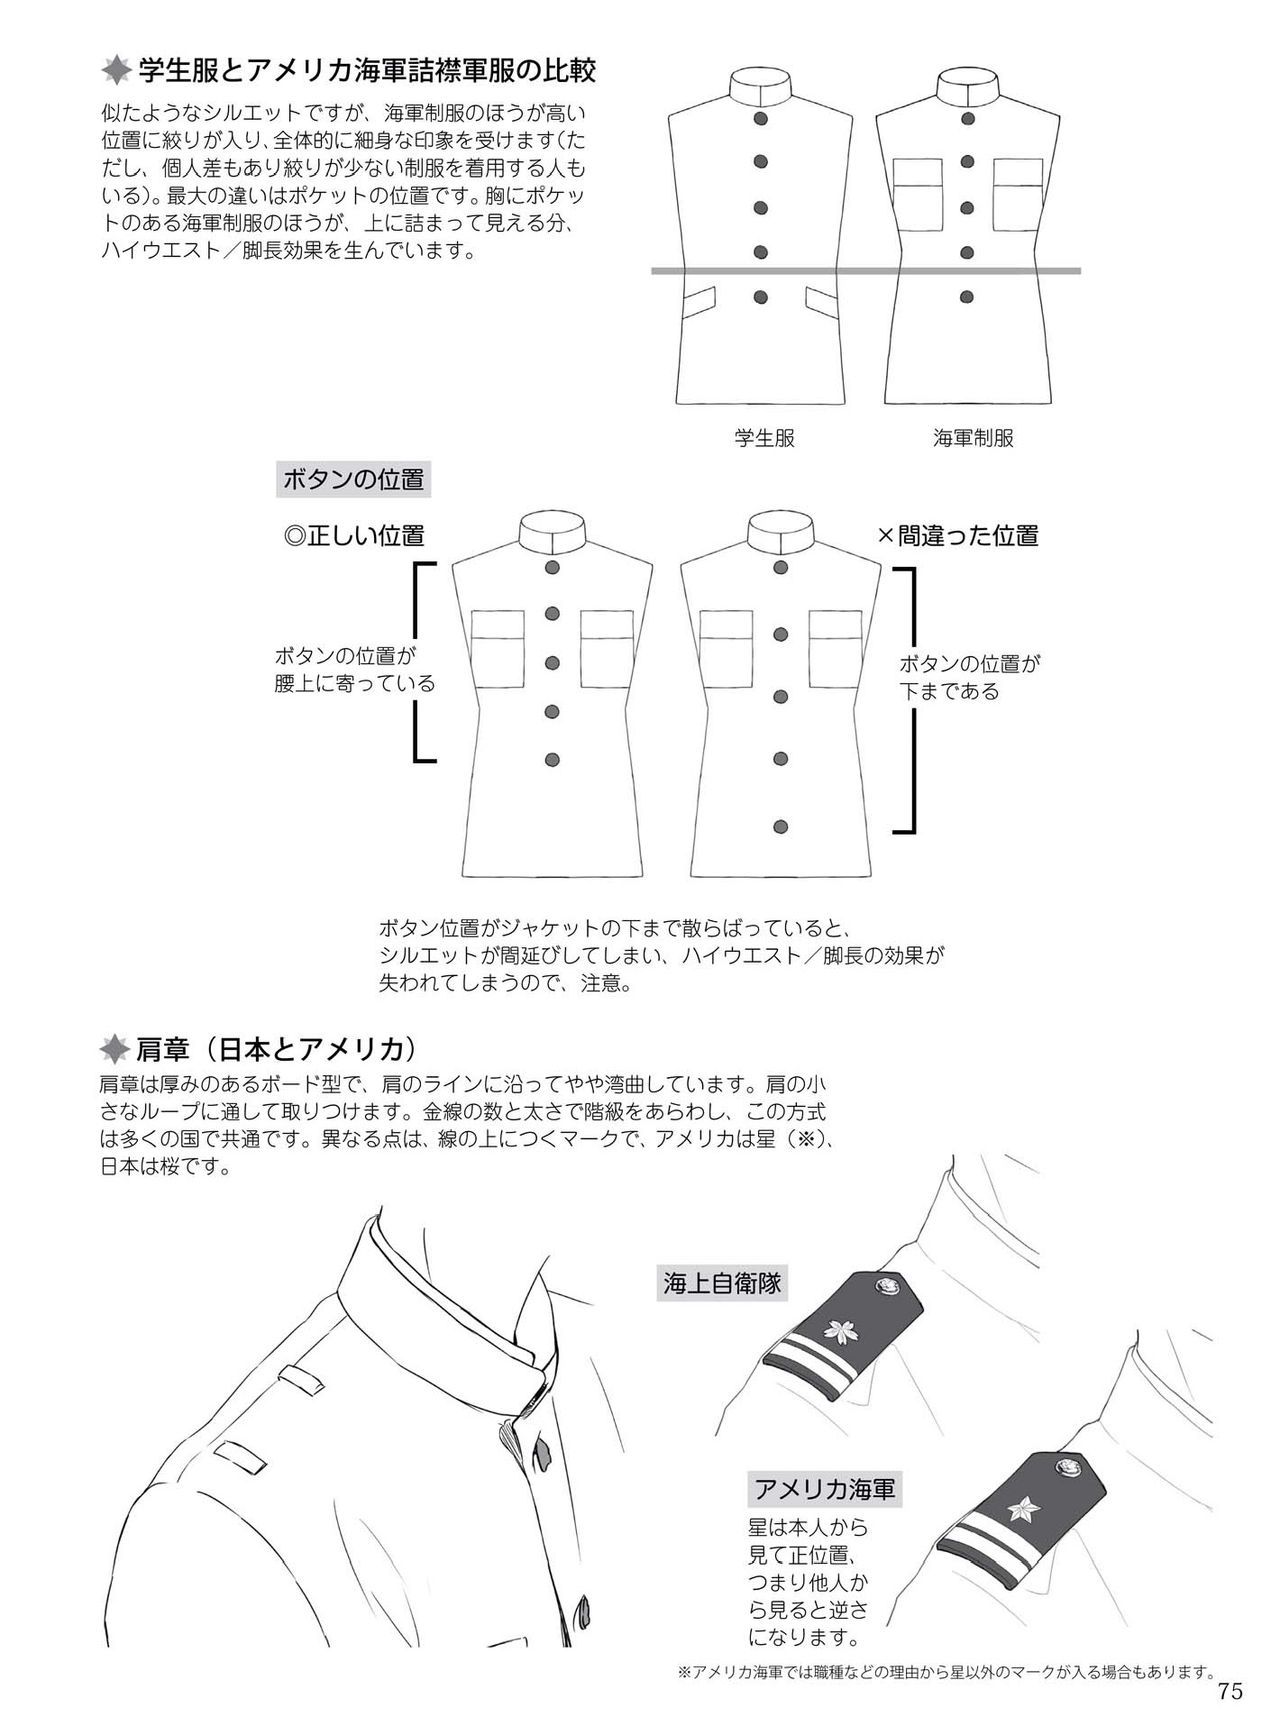 How to draw military uniforms and uniforms From Self-Defense Forces 軍服・制服の描き方 アメリカ軍・自衛隊の制服から戦闘服まで 78